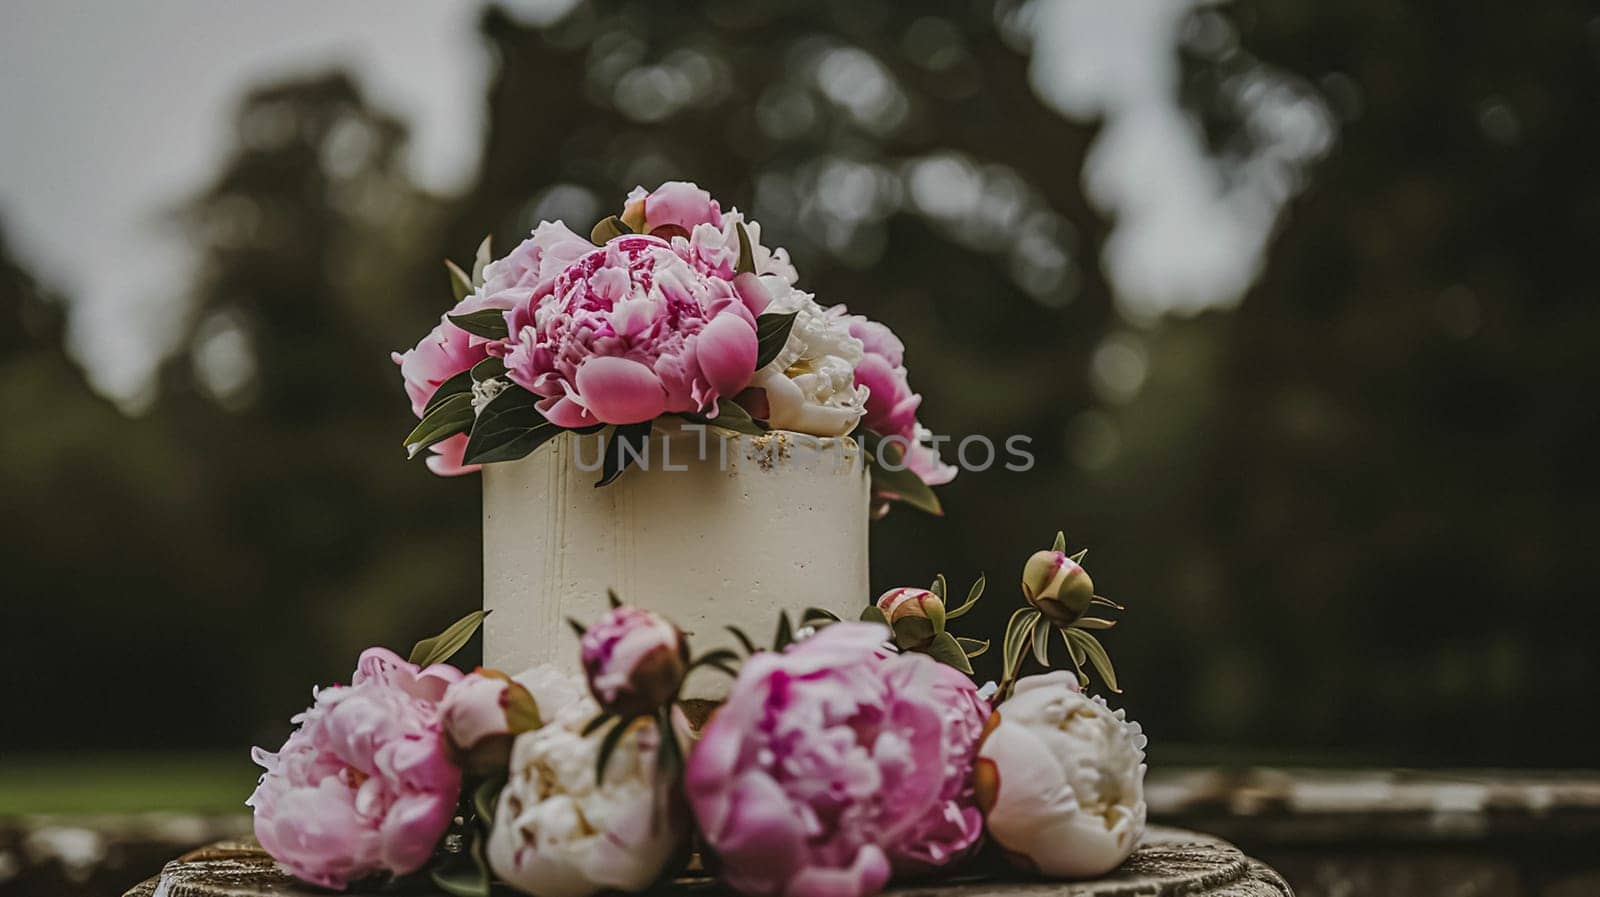 Wedding decoration with peonies, floral decor and event celebration, peony flowers and wedding ceremony in the garden, English country style